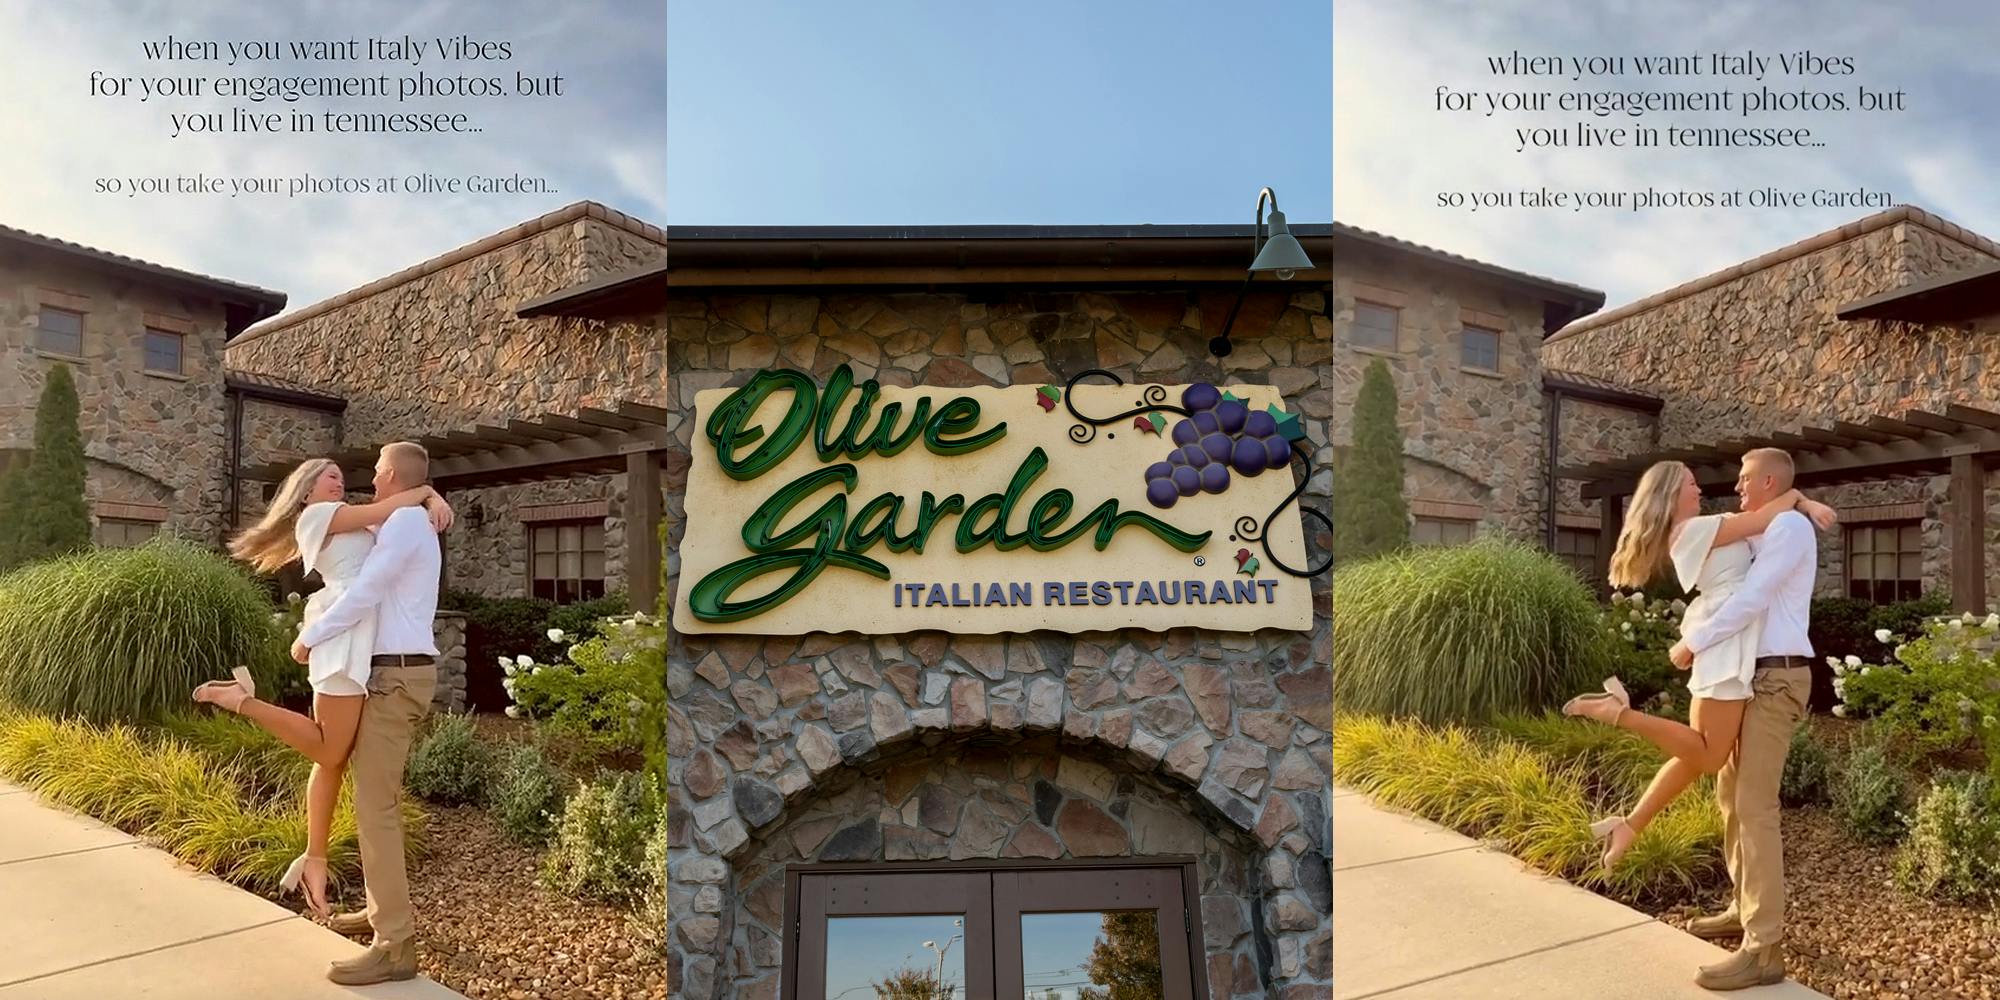 couple holding each other outside of Olive Garden caption "when you want Italy vibes for your engagement photos but you live in Tennessee... so you take your photos at Olive Garden" (l) Olive Garden restaurant with sign (c) couple holding each other outside of Olive Garden caption "when you want Italy vibes for your engagement photos but you live in Tennessee... so you take your photos at Olive Garden" (r)